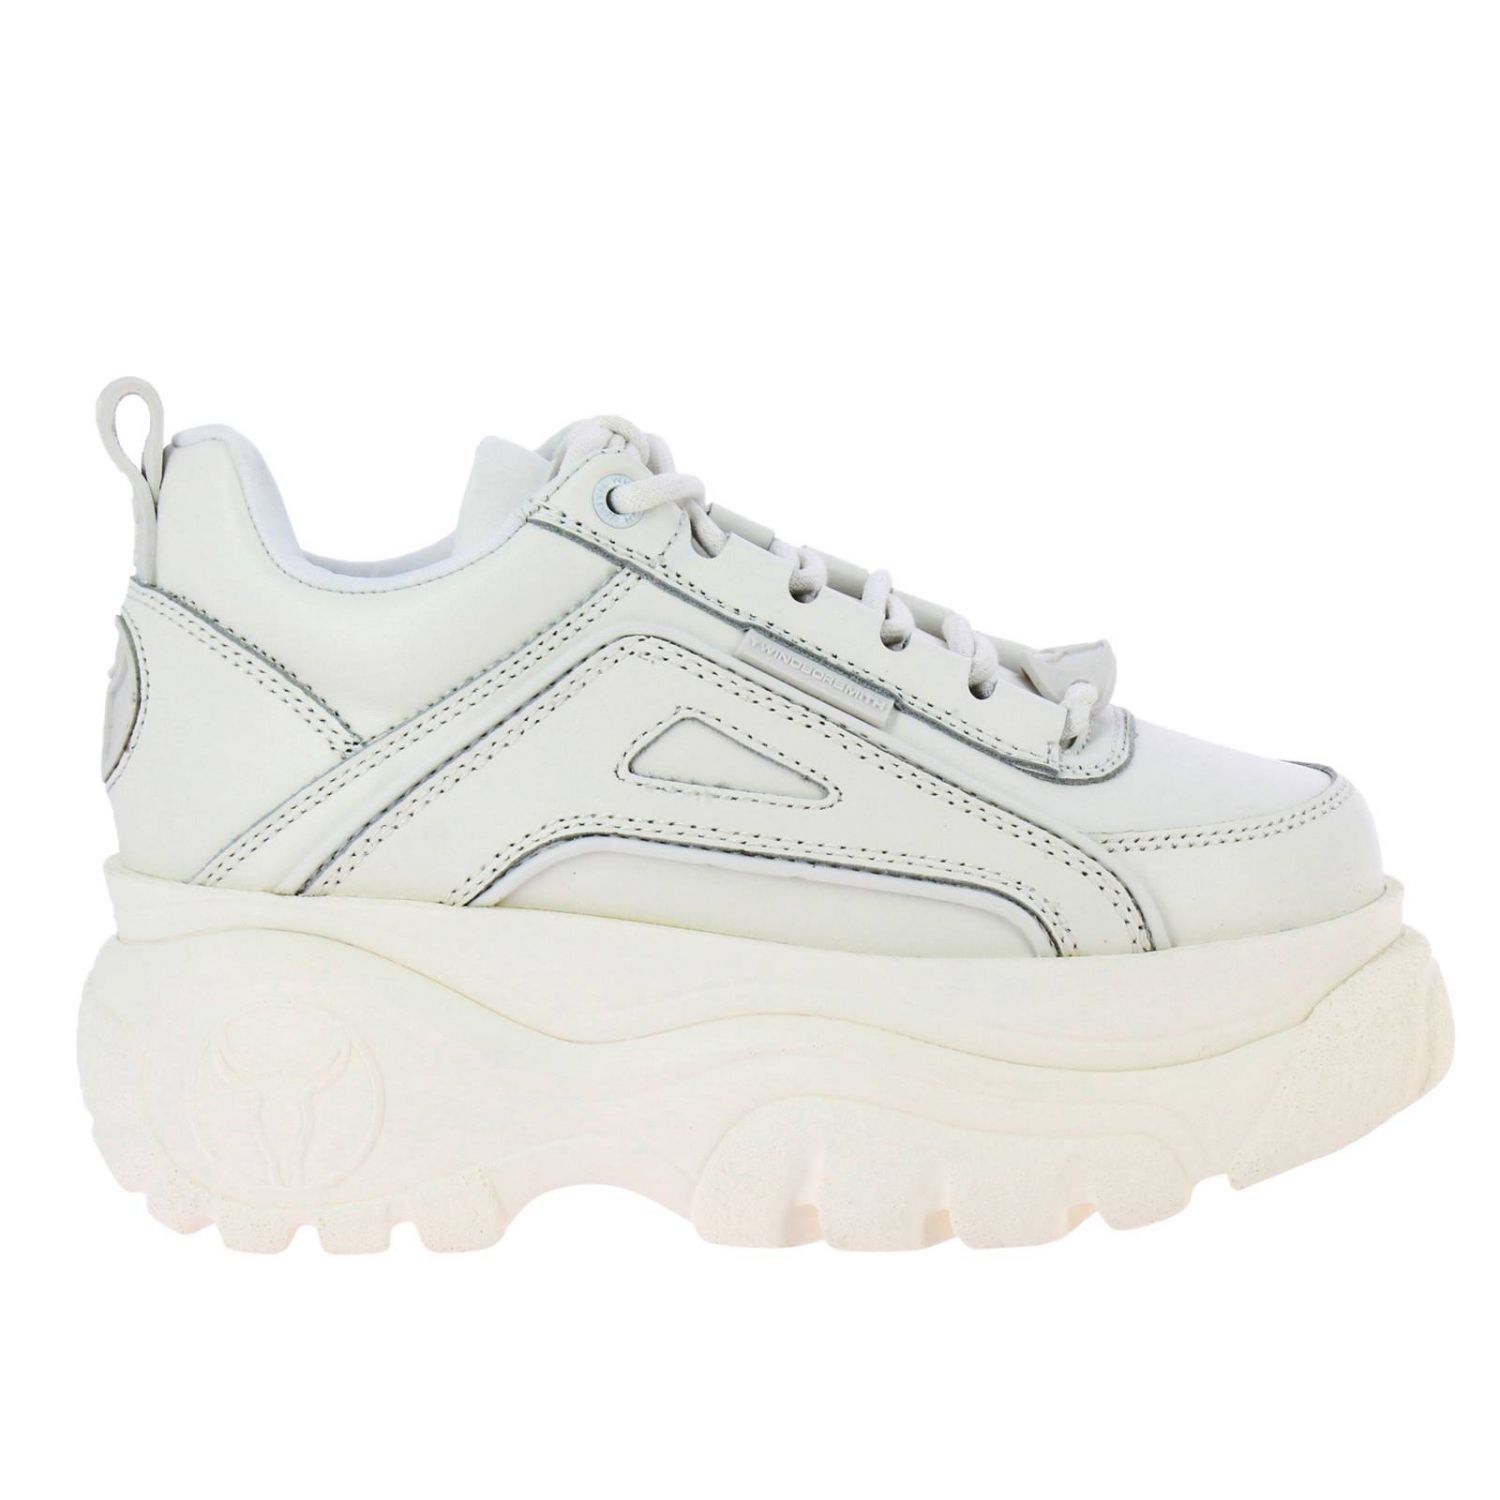 Windsorsmith Asap Outlet: sneakers for woman - White | Windsorsmith ...